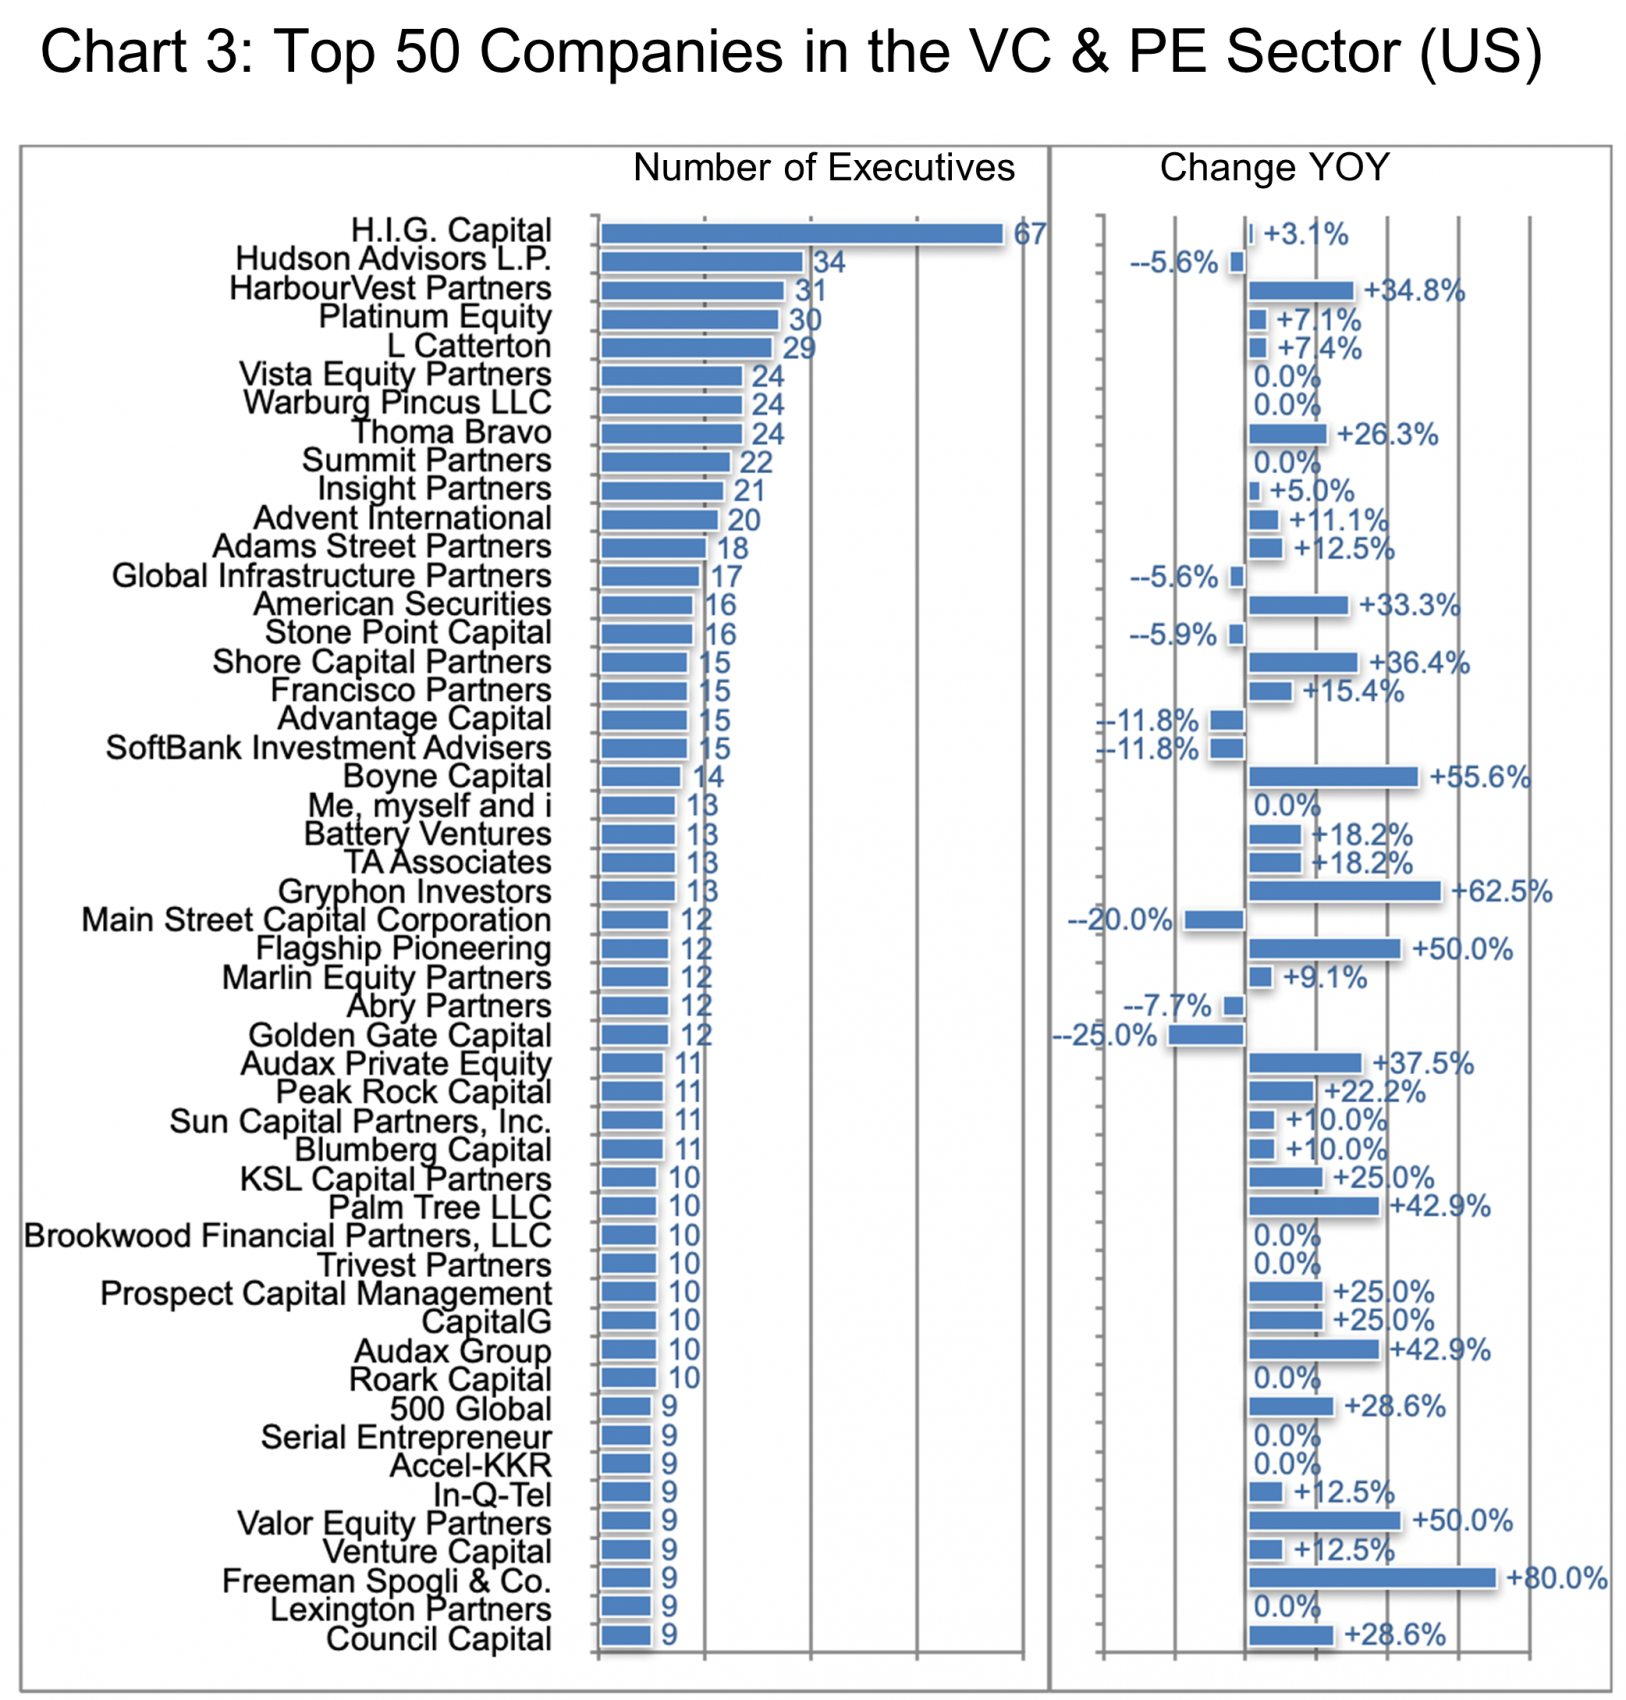 Top 50 Companies in the VC & PE Sector (US): Chart 3